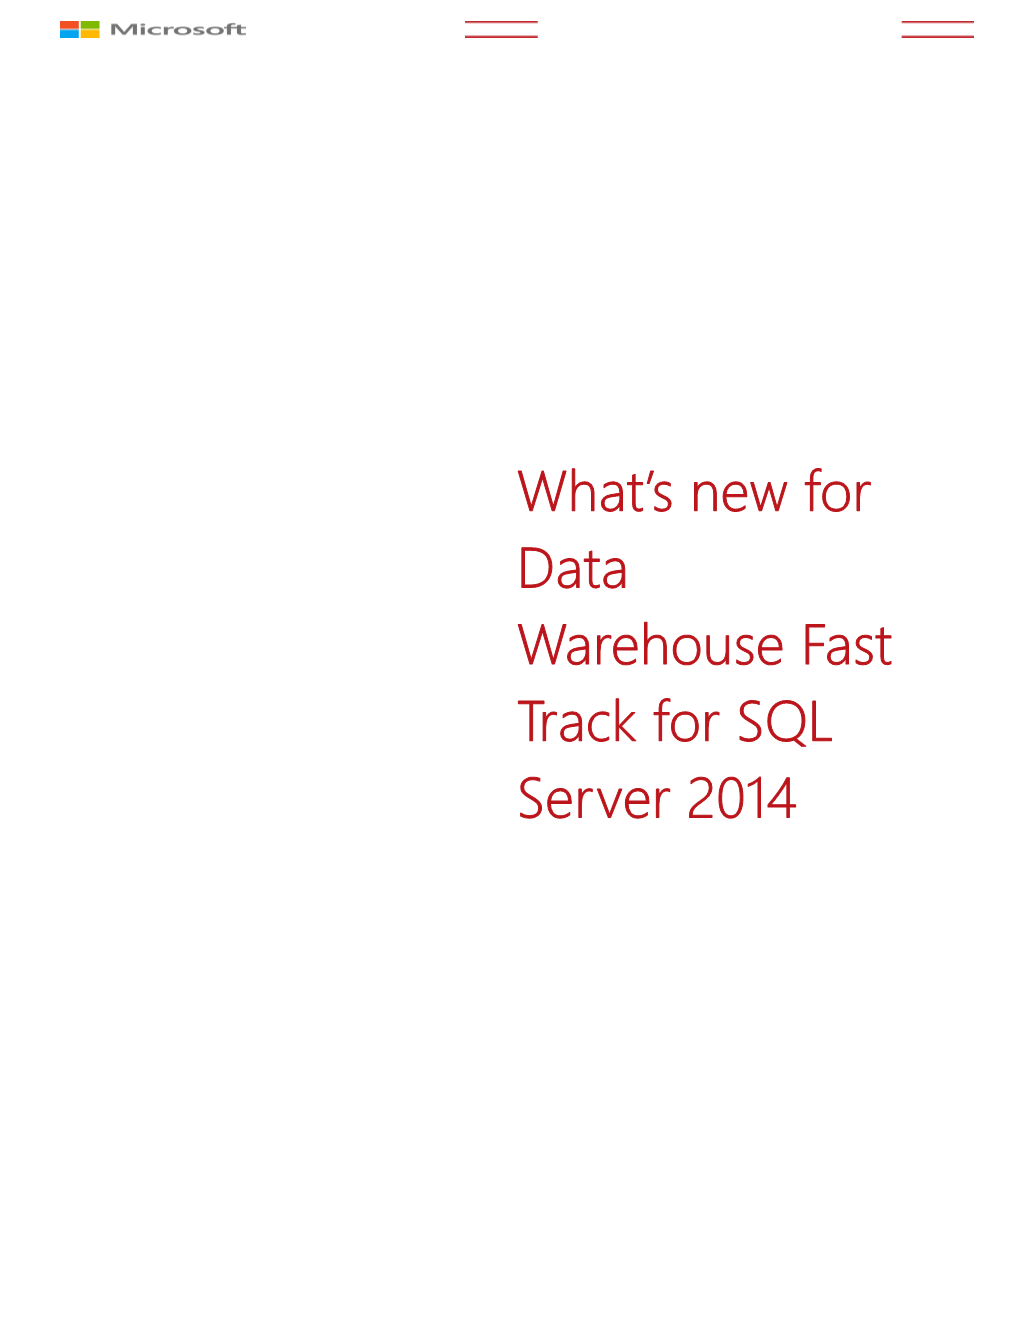 What's New for Data Warehouse Fast Track for SQL Server 2014